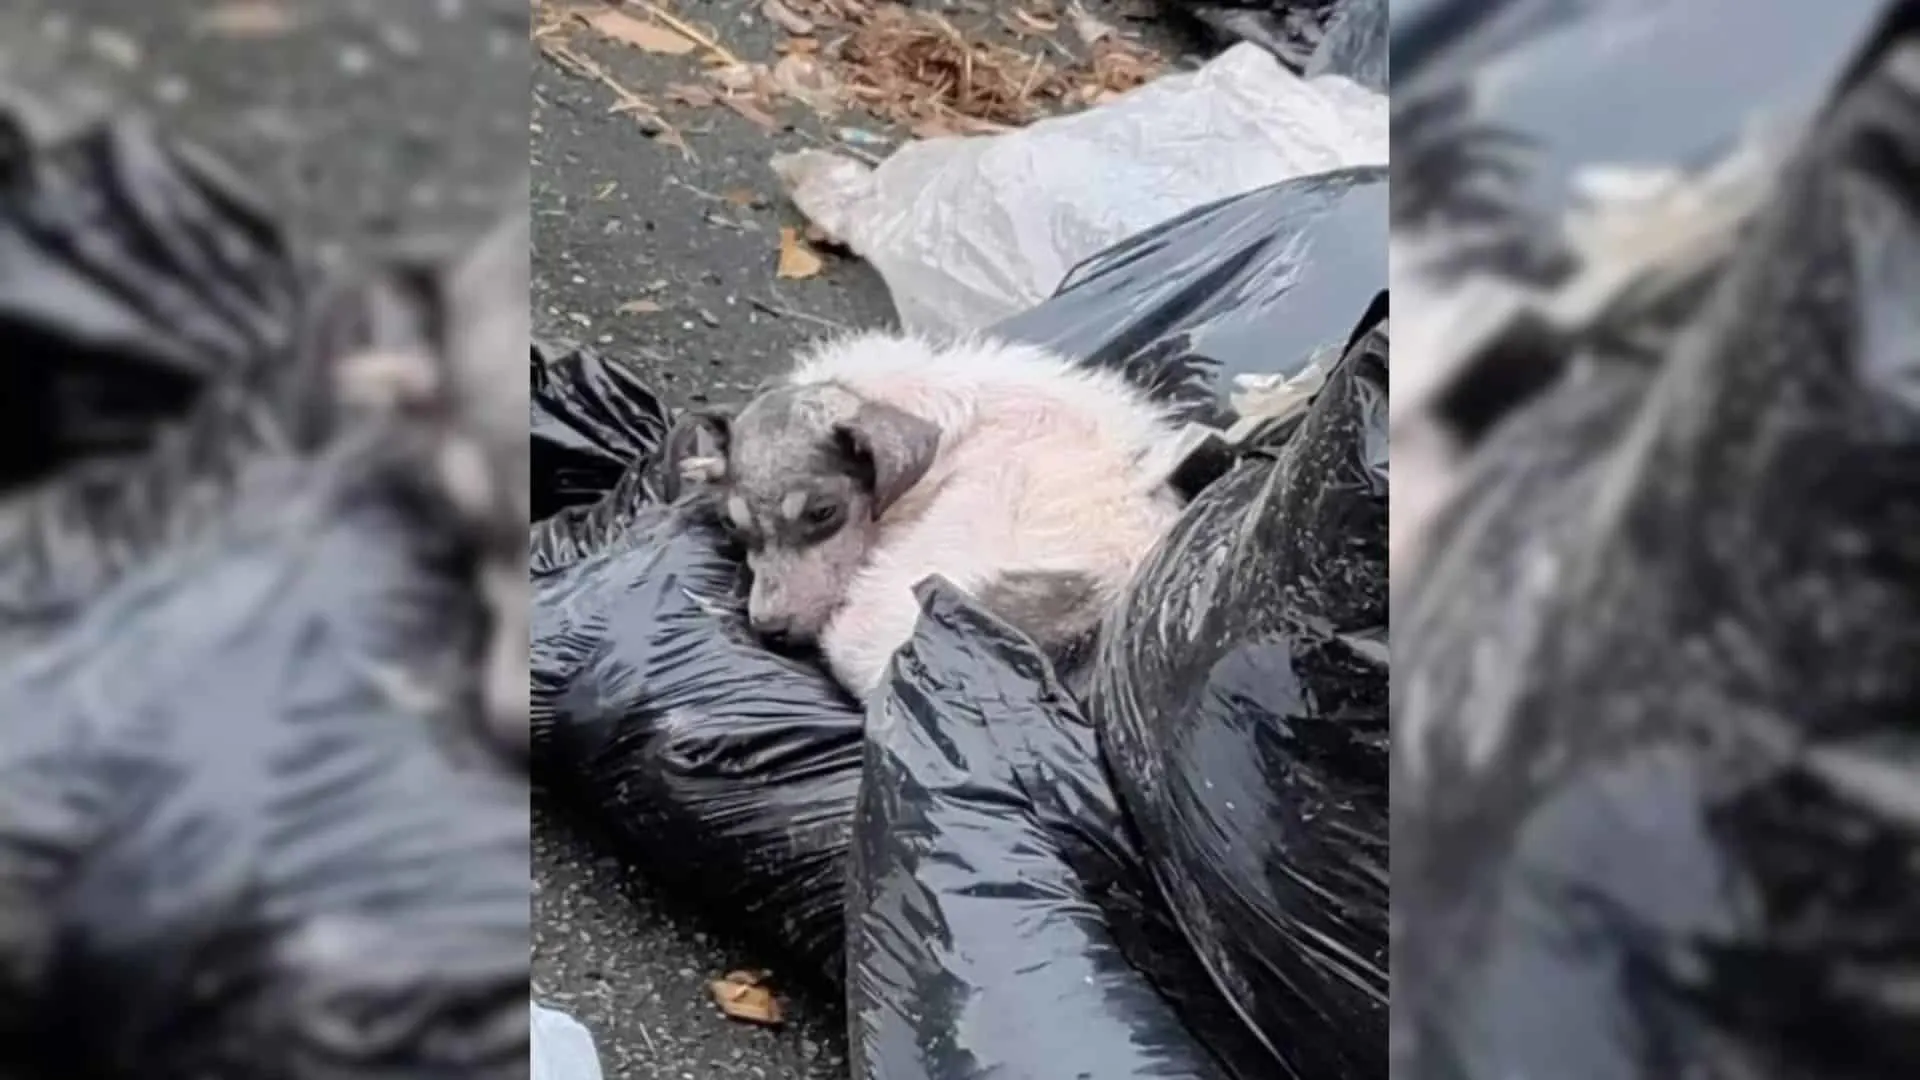 Stray Dog Who Slept On Trash Bags Looks Completely Different Thanks To The New Owner’s Love